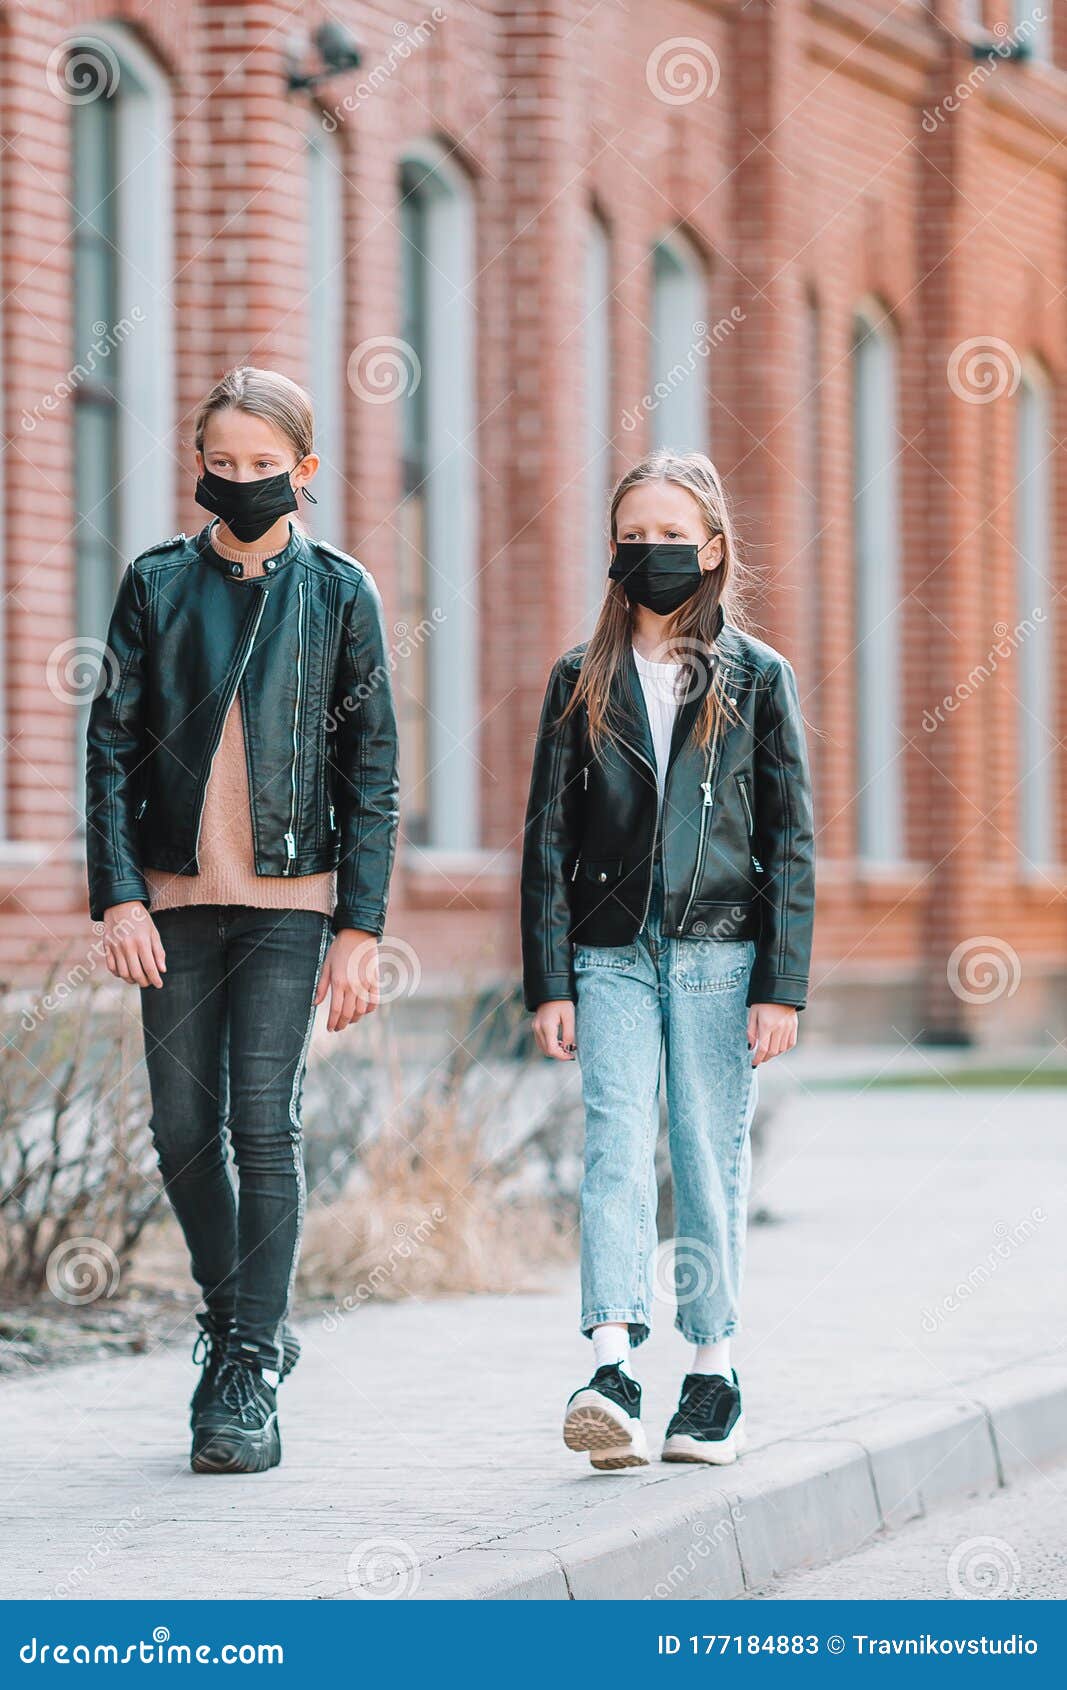 Girls Wearing a Mask on a Background of a Modern Building, Stock Image ...